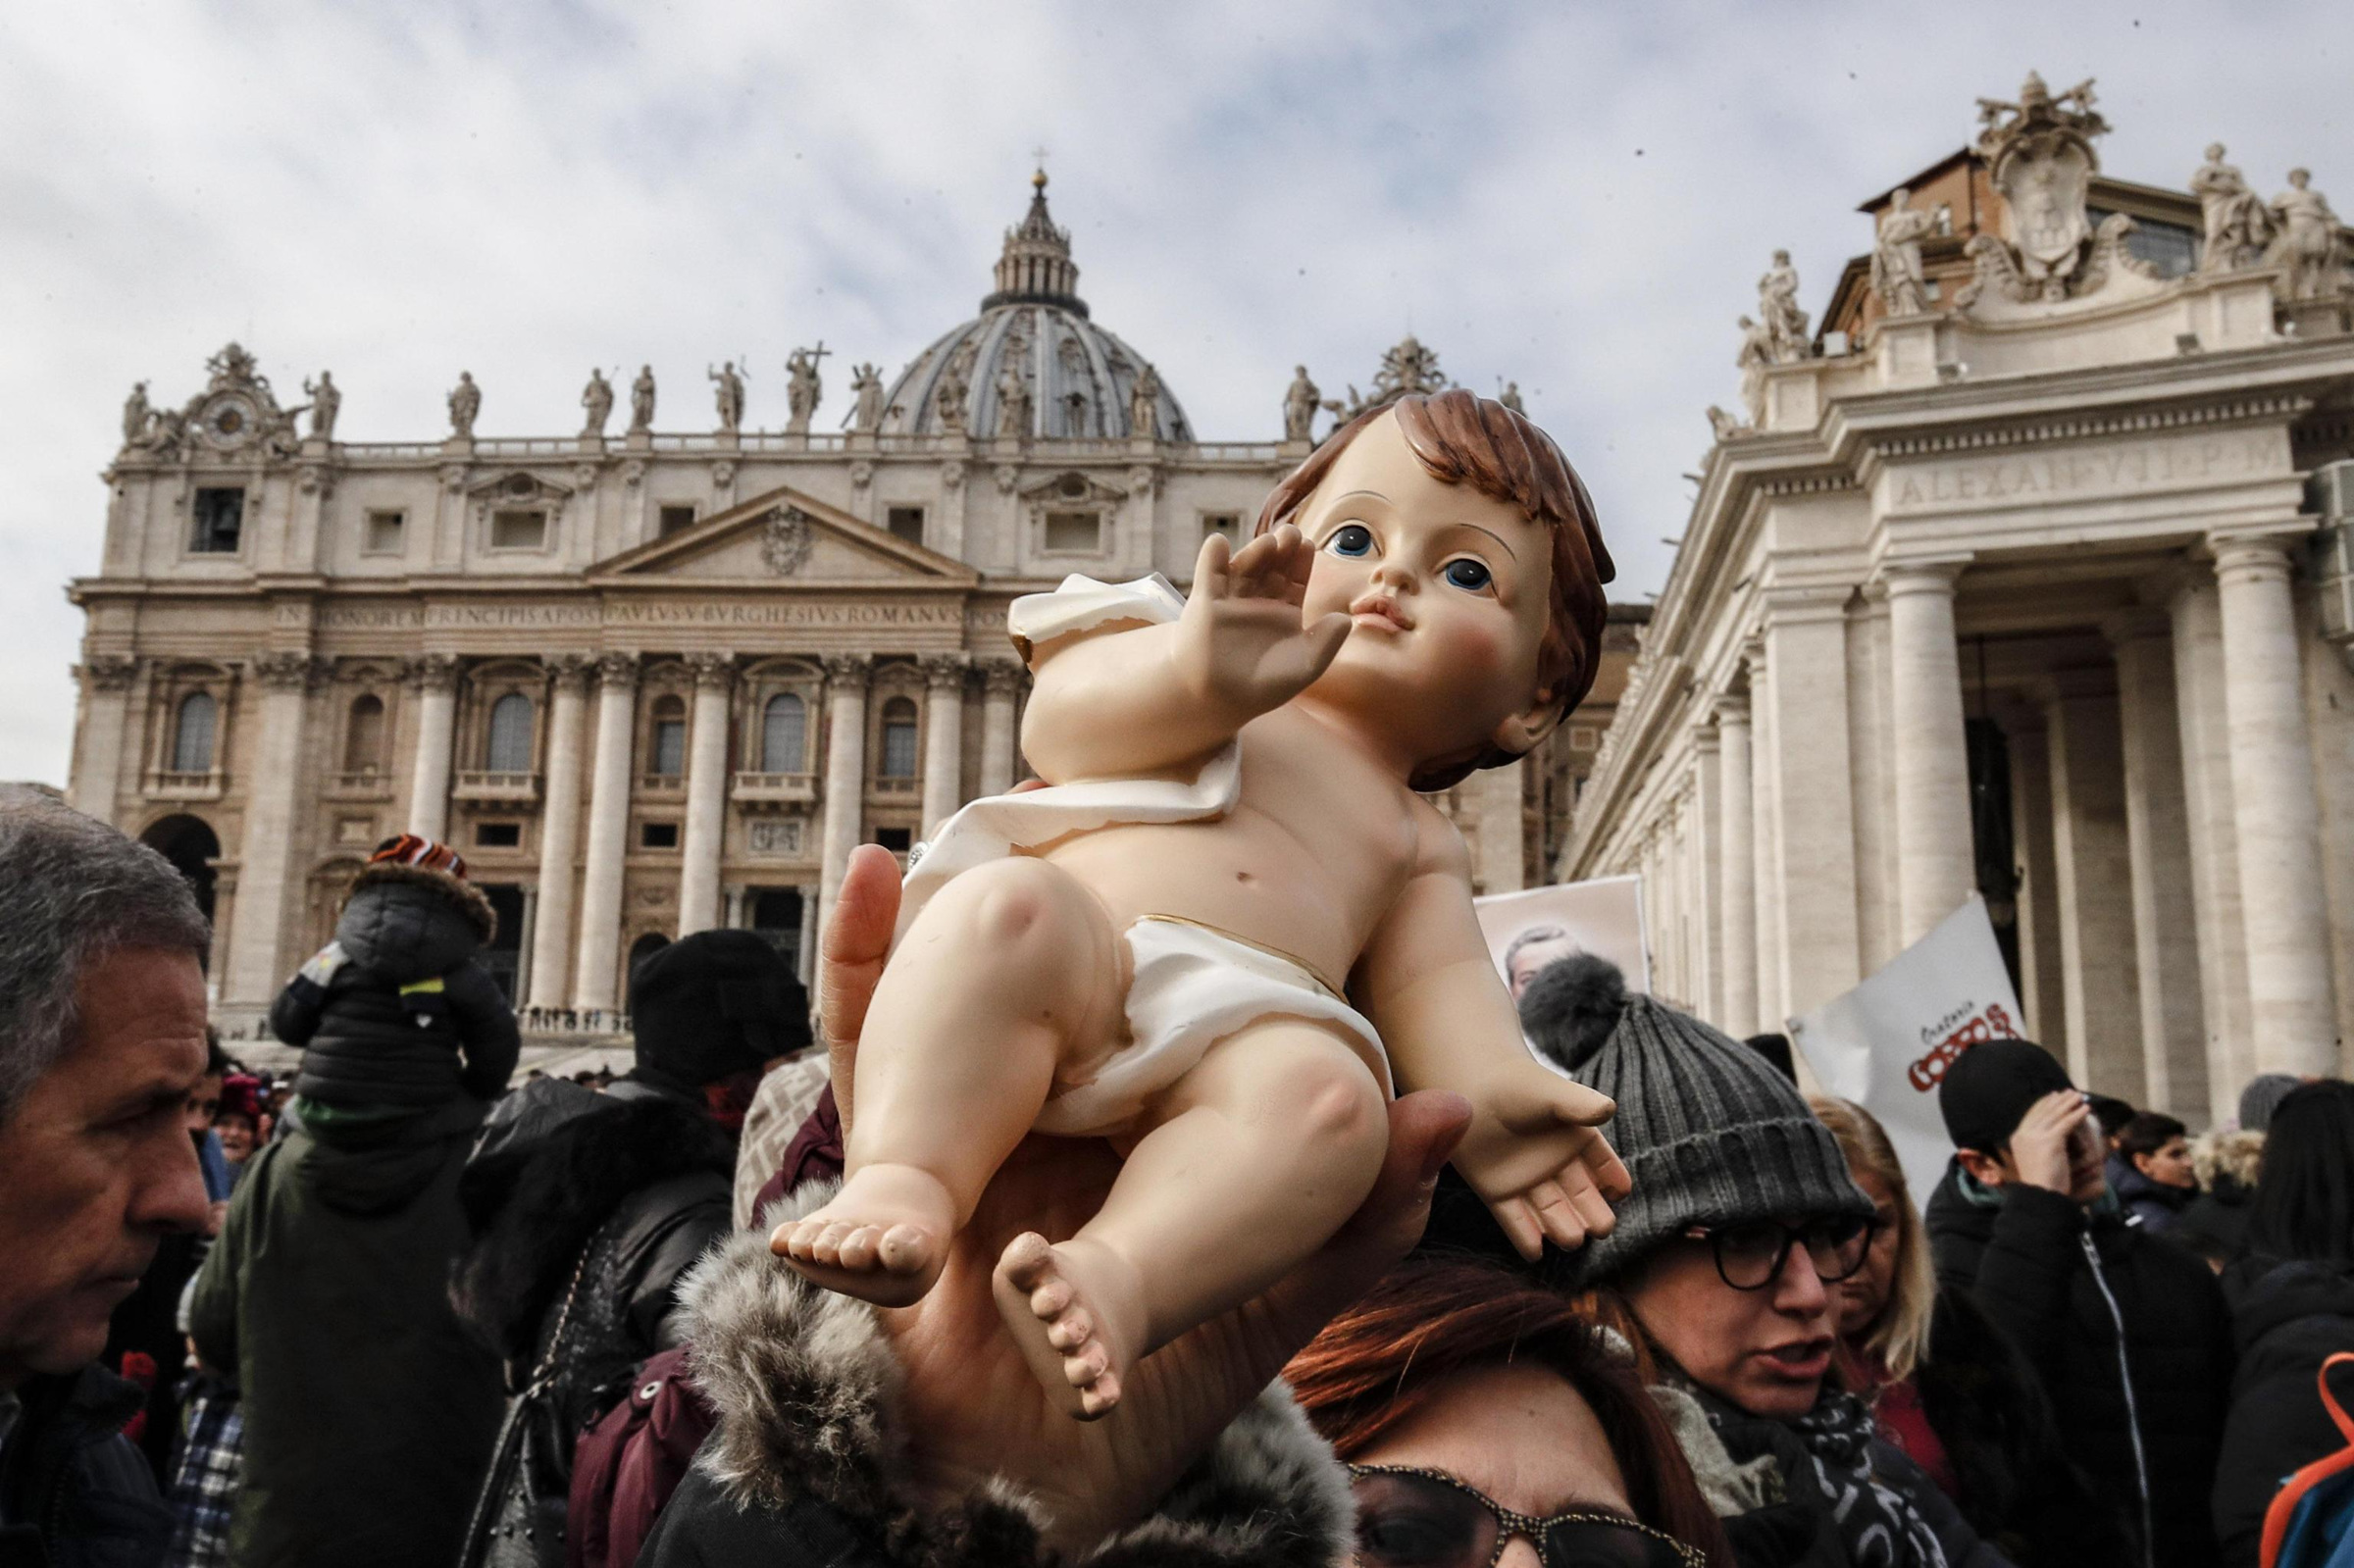 True Christmas celebrates Jesus, who is tender, humble, pope says